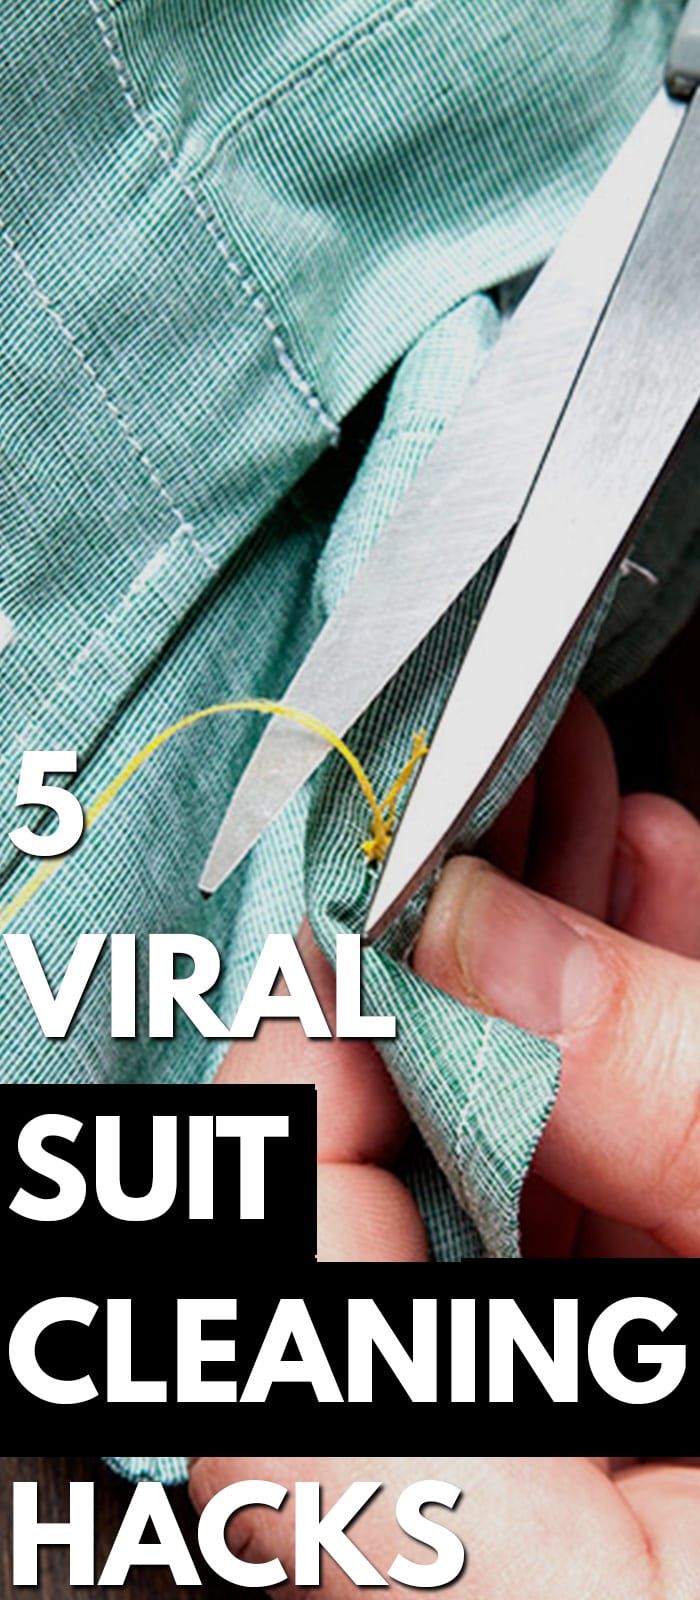 5 Viral Suit Cleaning Hacks.